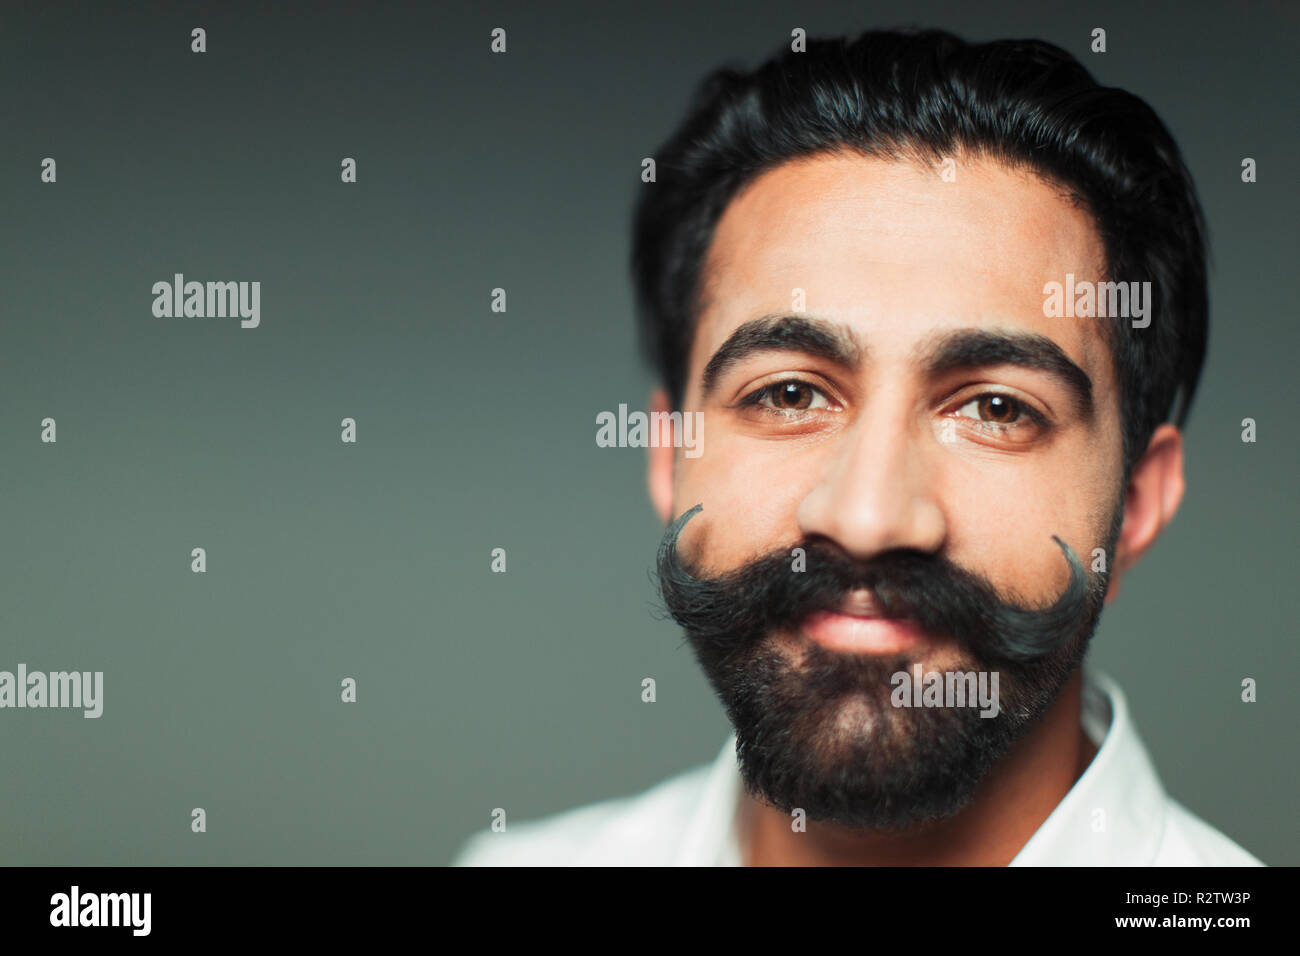 Portrait smiling, confident young man with handlebar handlebar mustache Stock Photo